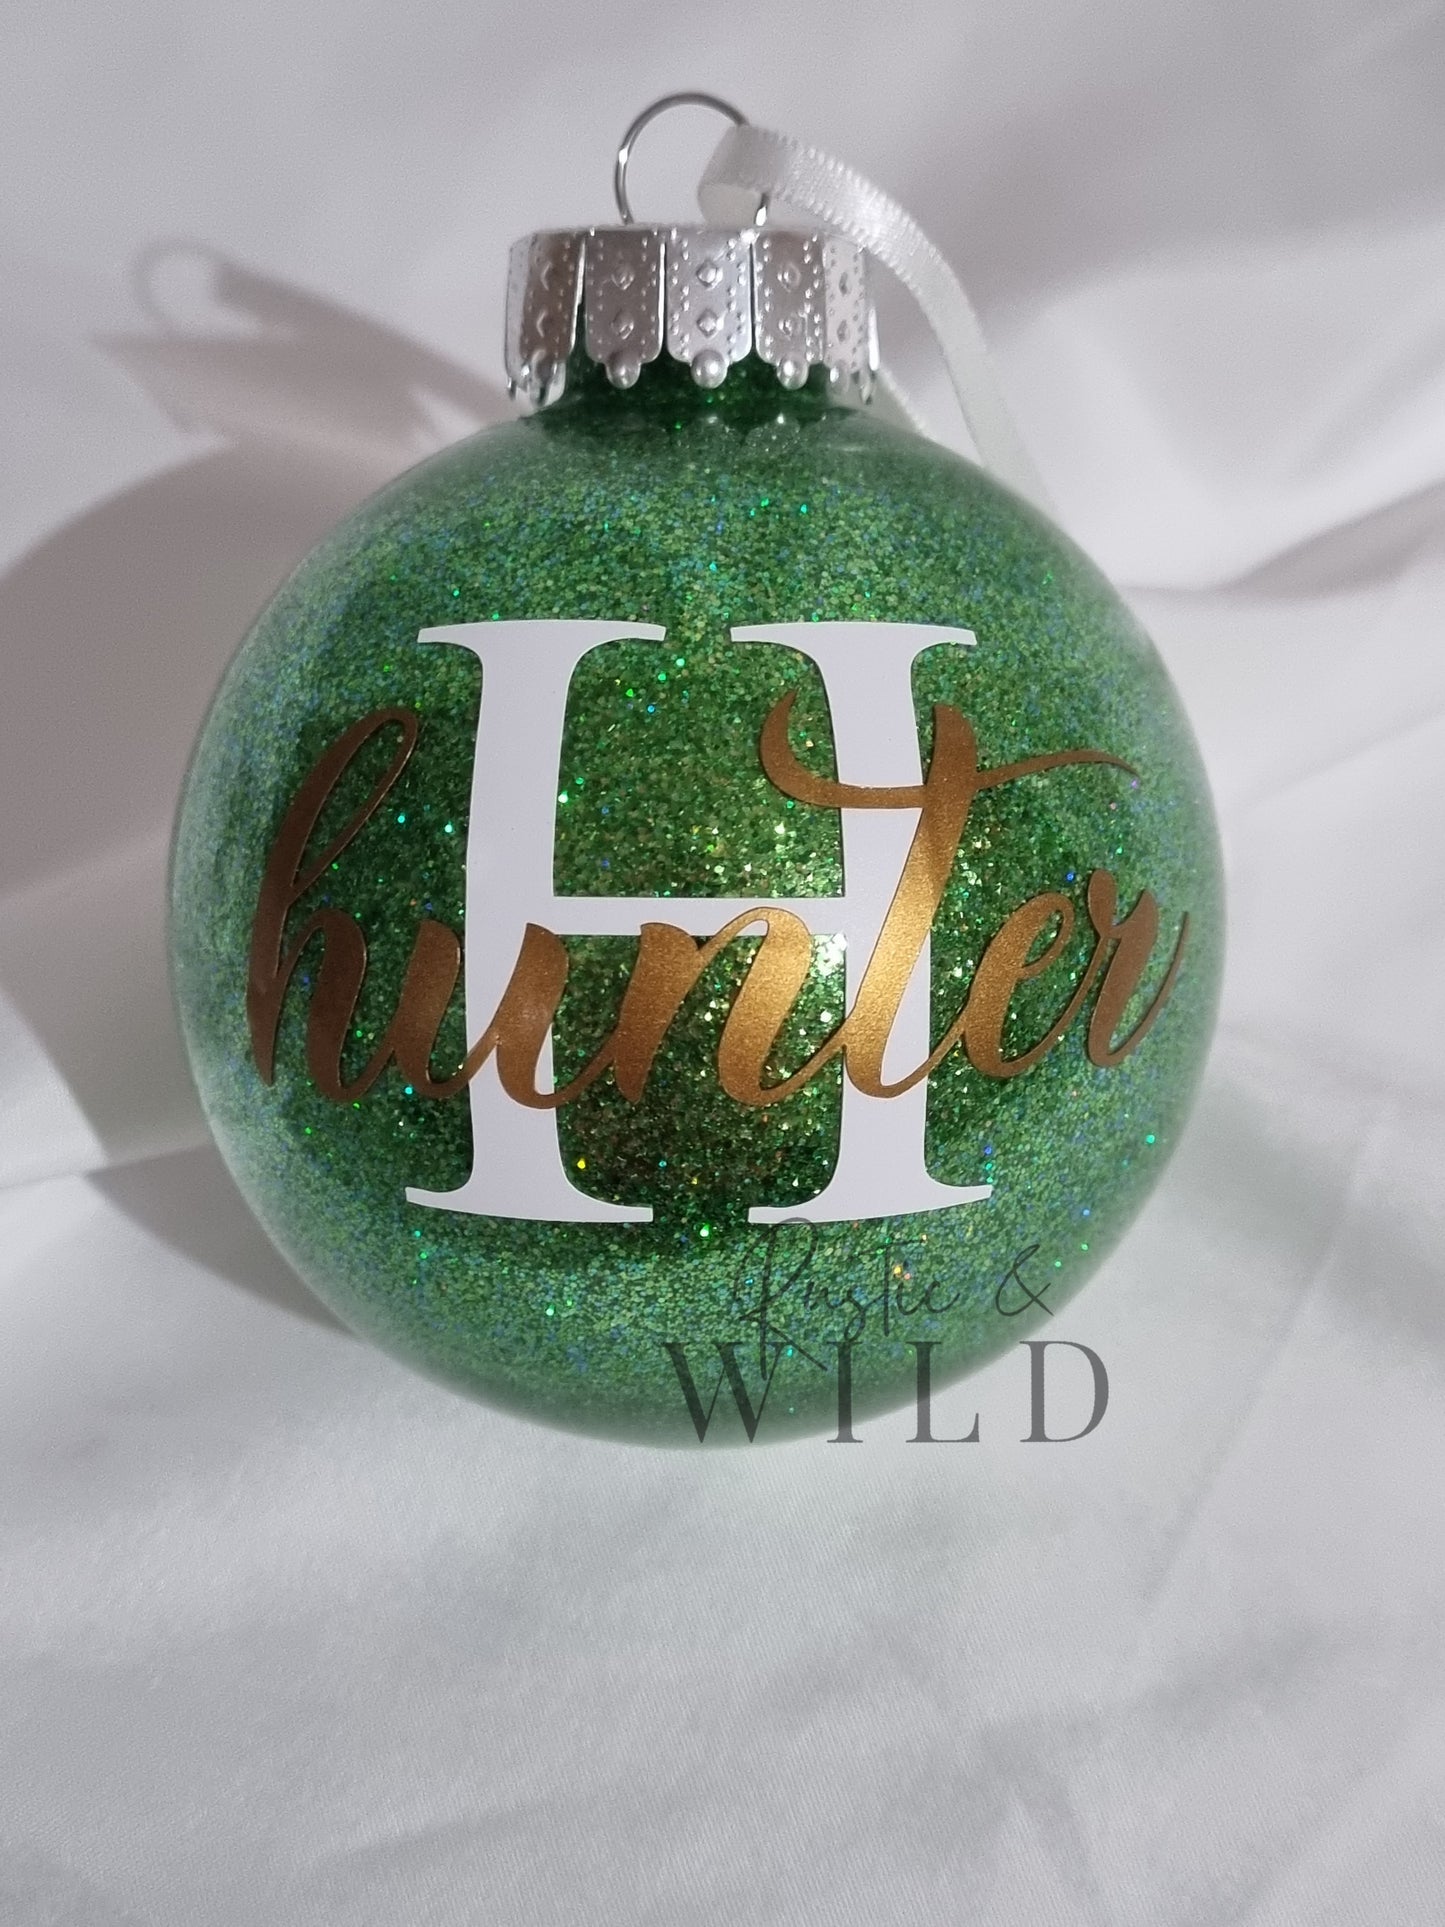 Personalised Glitter Baubles